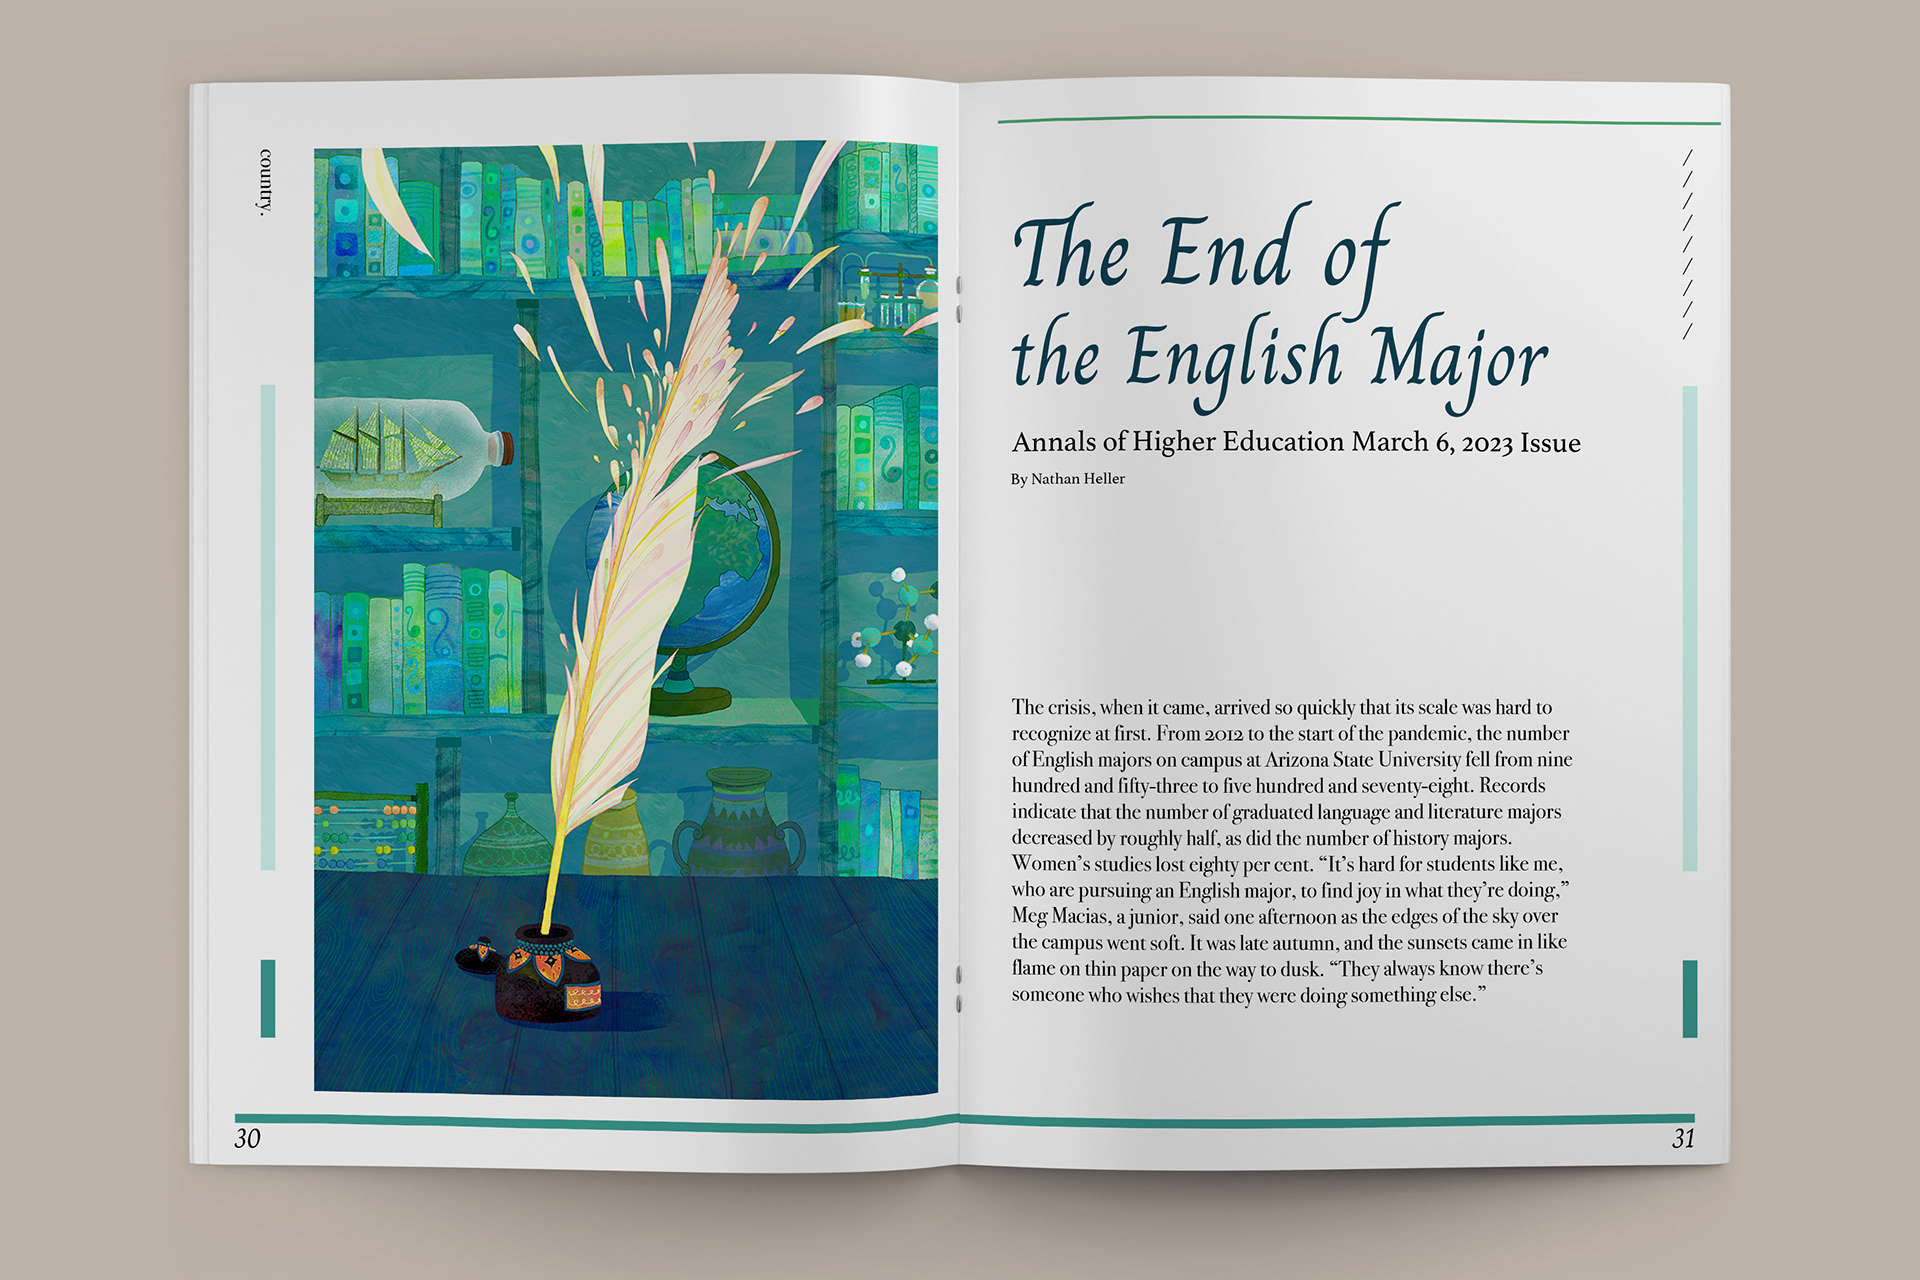 The End of the English Major